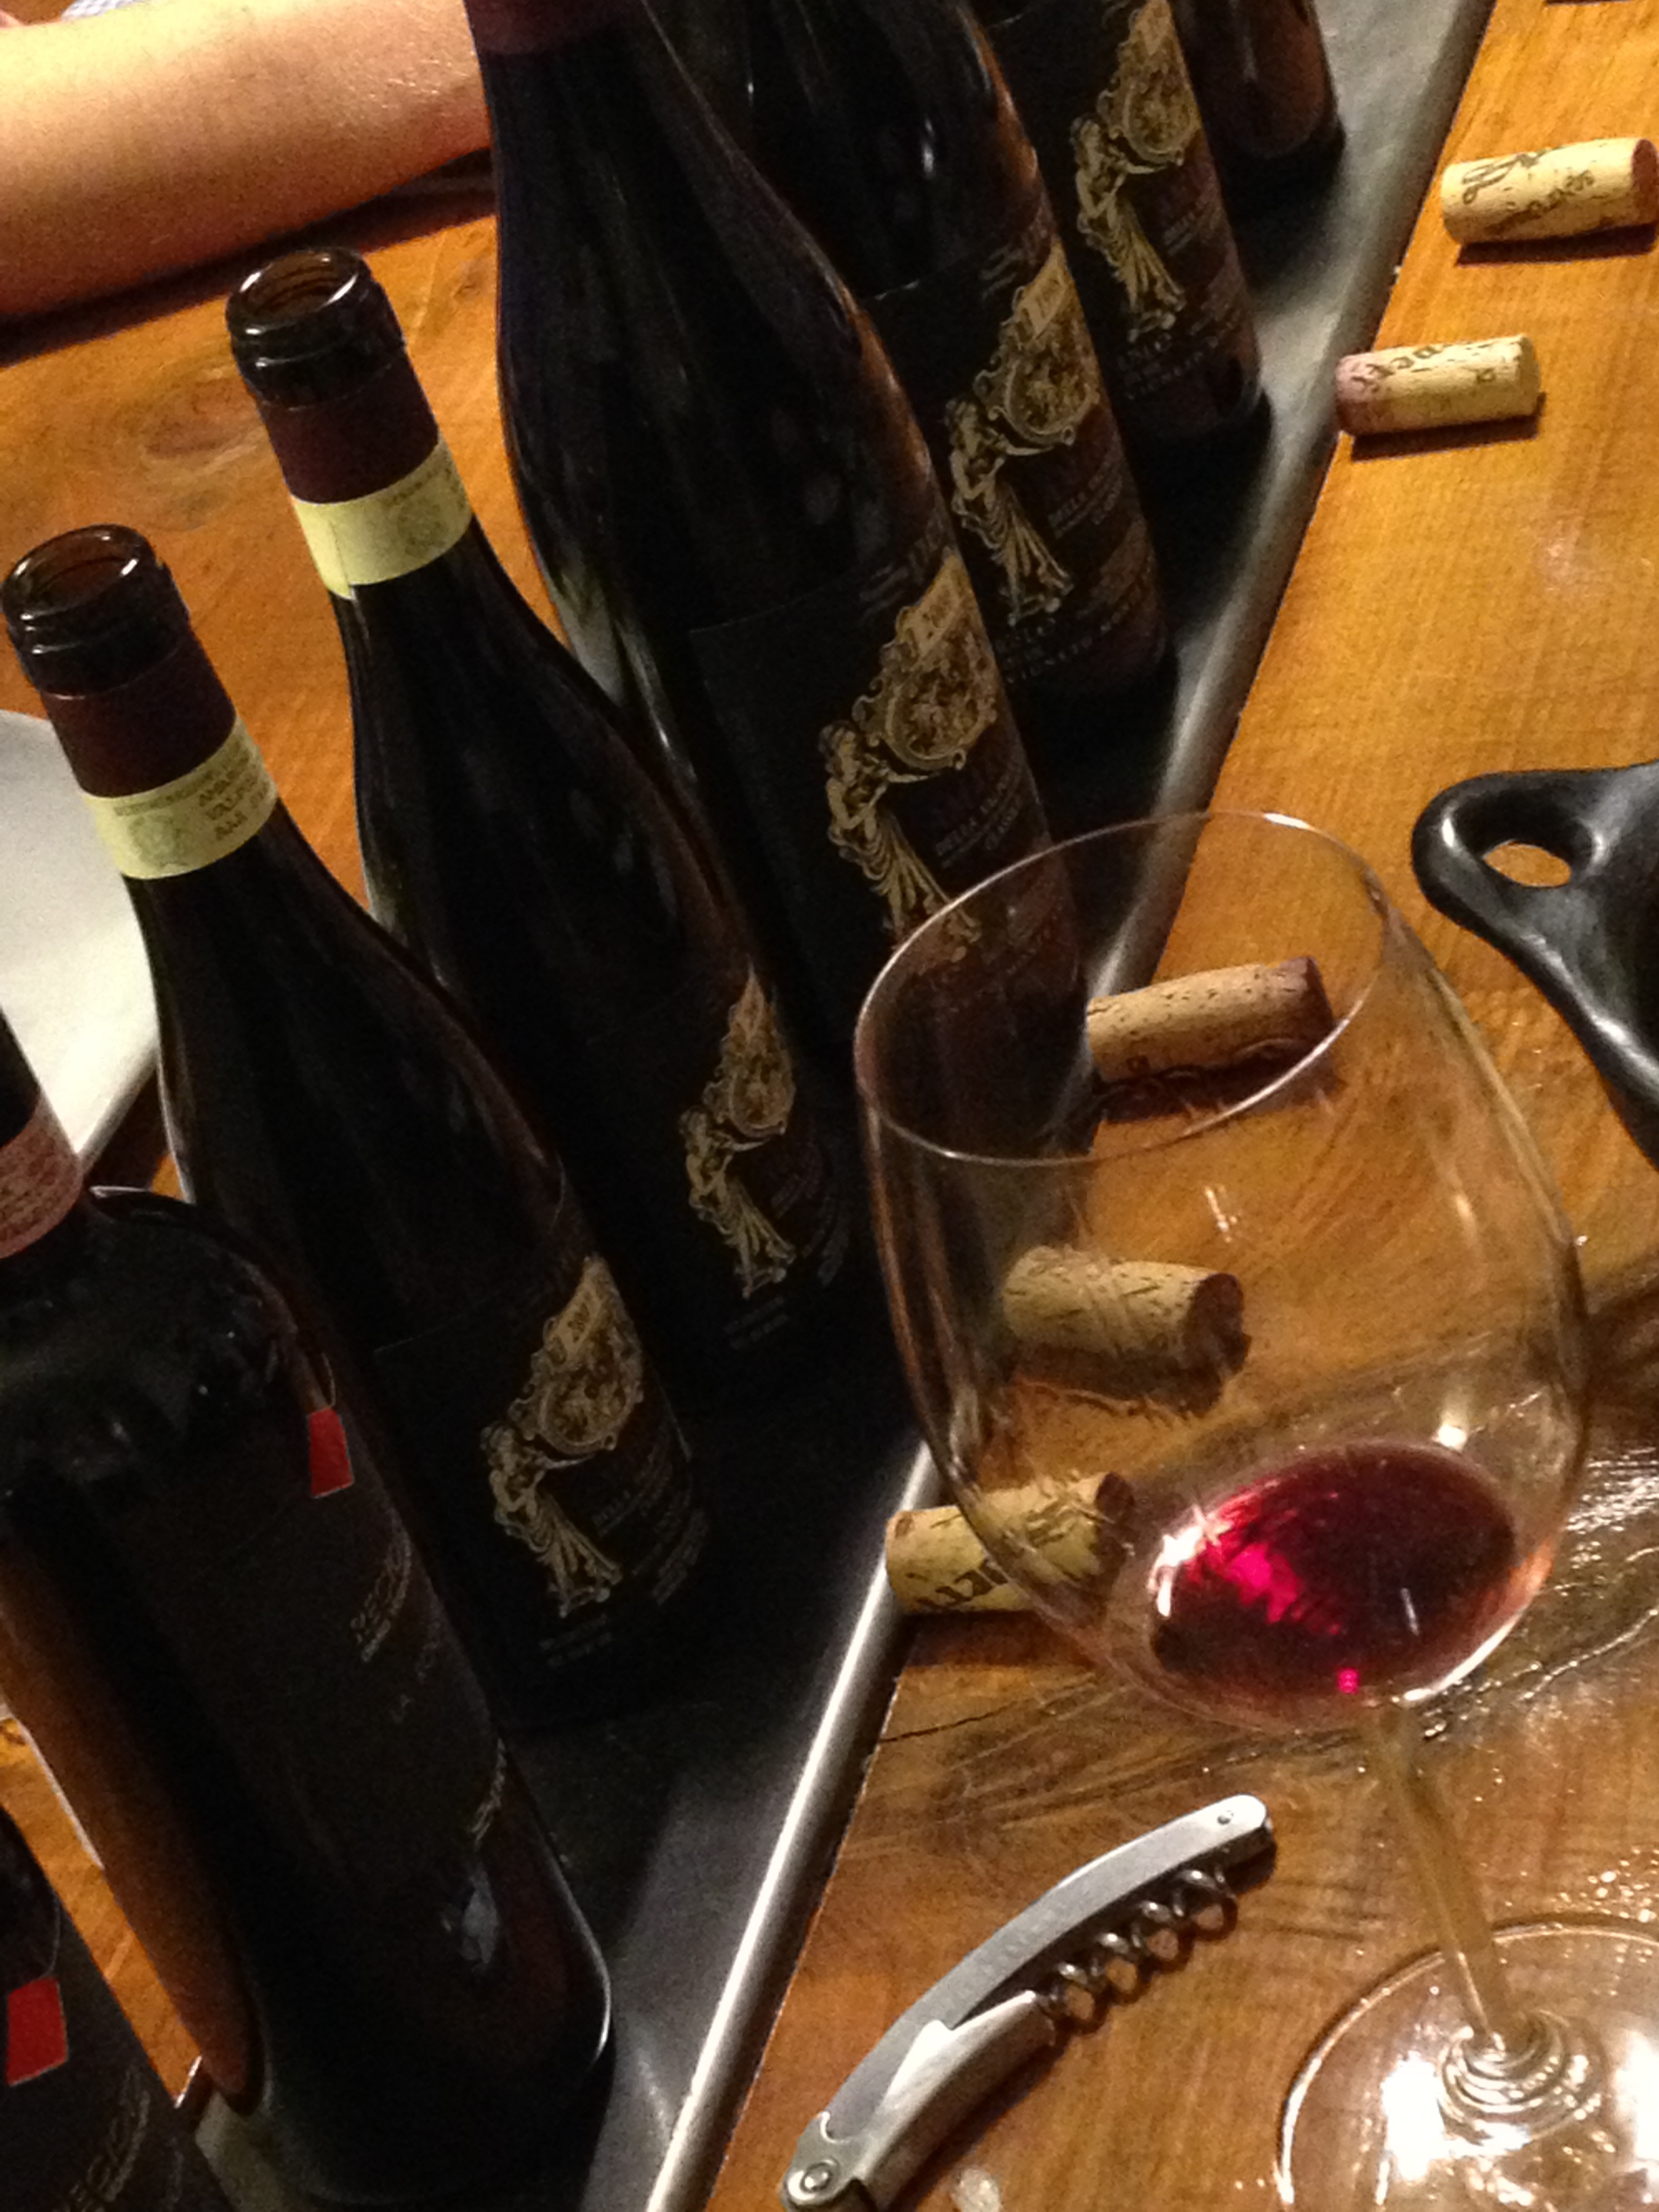  The evening's lineup of Speri wines.​ 